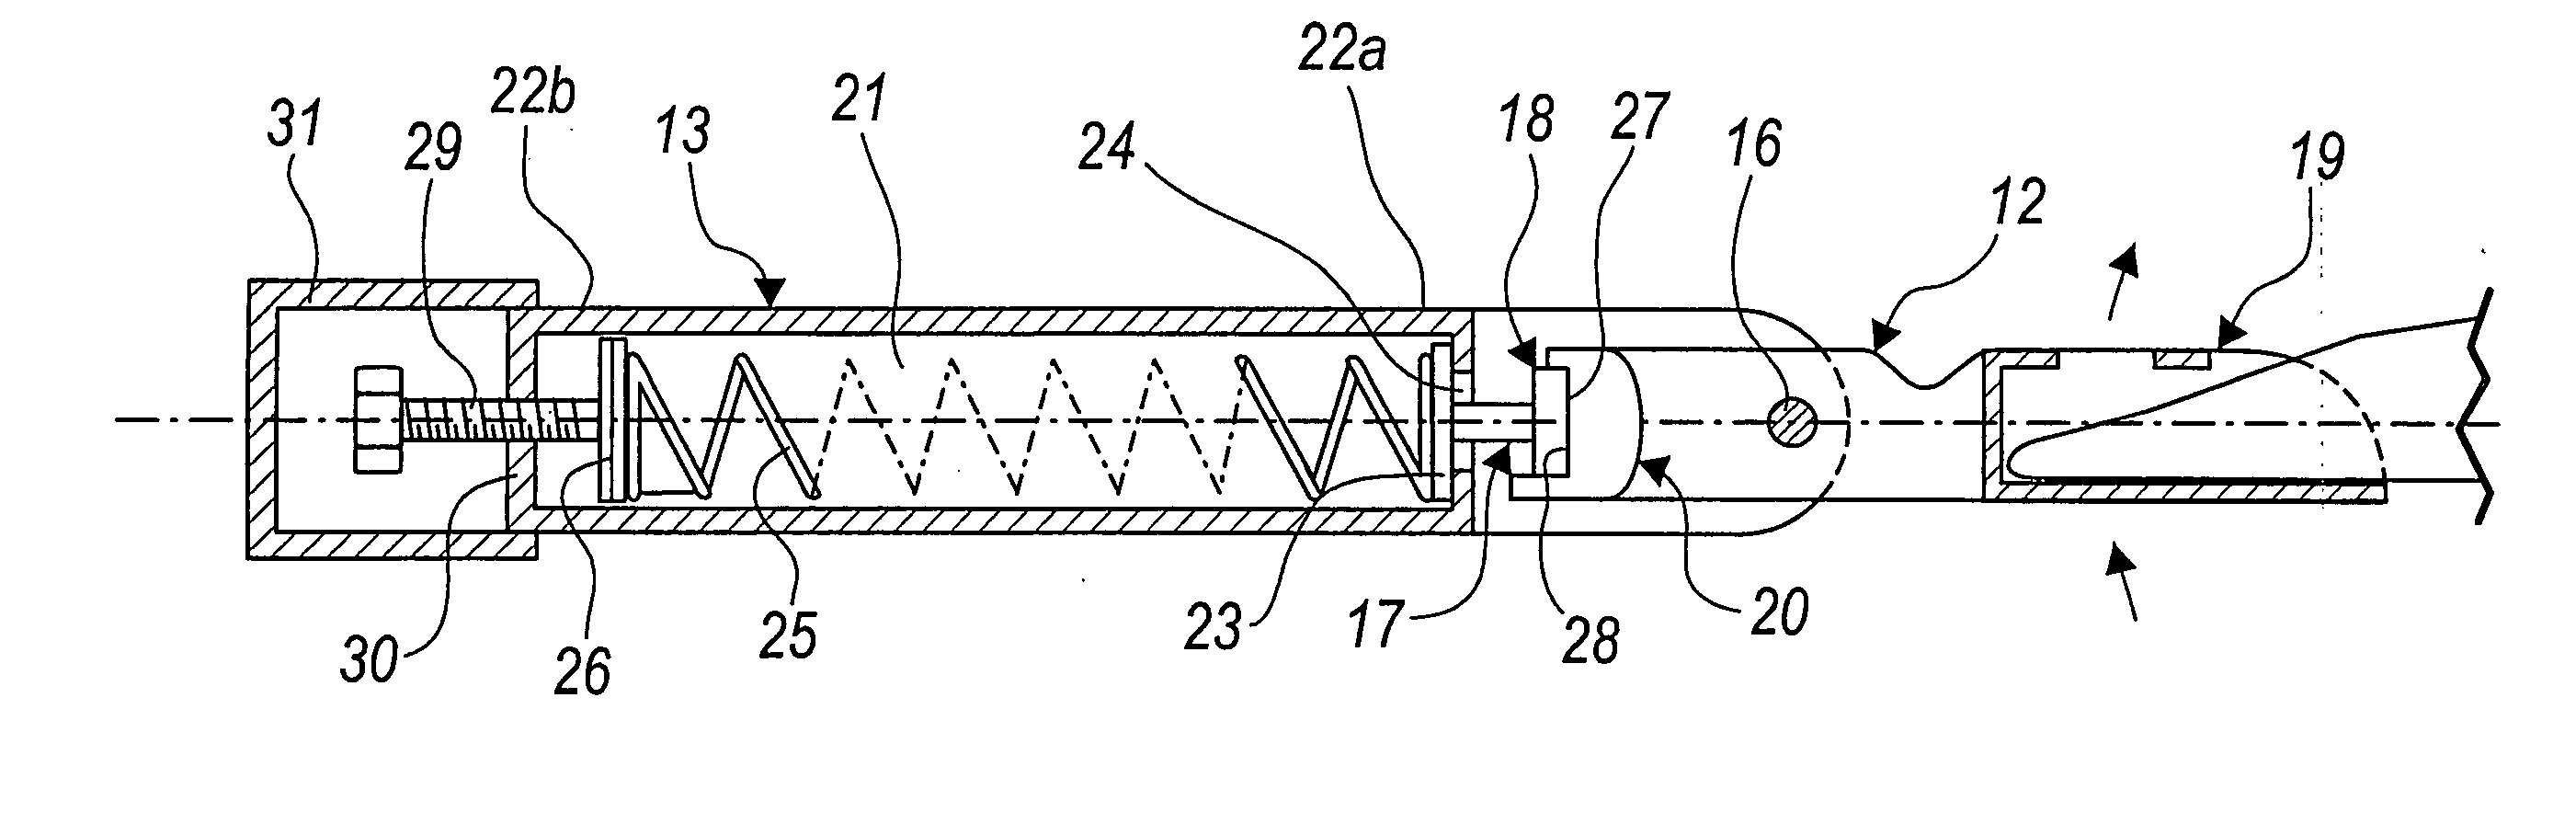 Apparatus for extending the arm of a lever